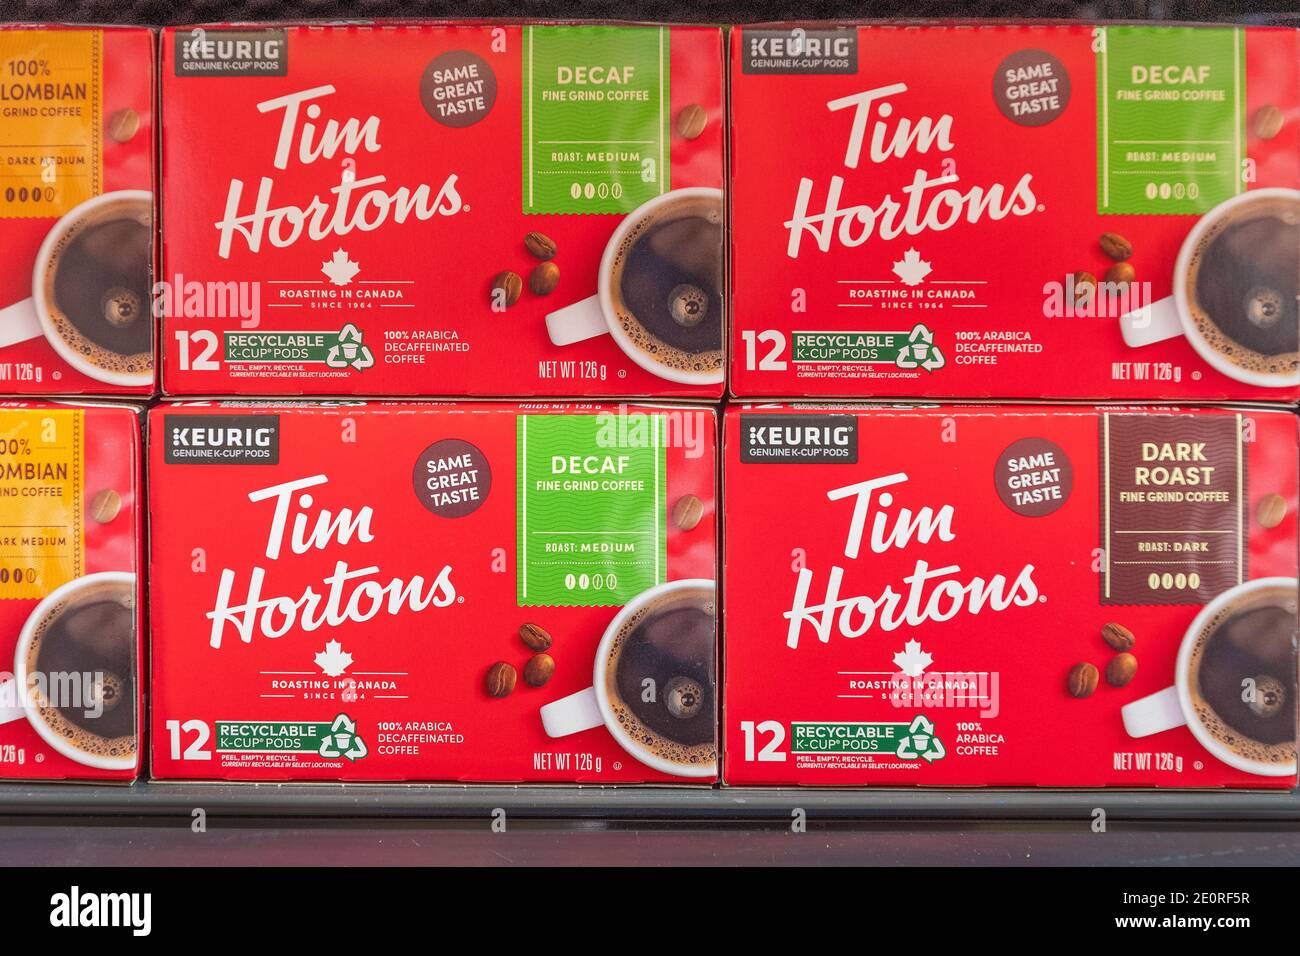 Boxes of Tim Horton's coffee are seen on a store shelf. The brand is very popular among Canadians. There are no people in the color scene. Stock Photo